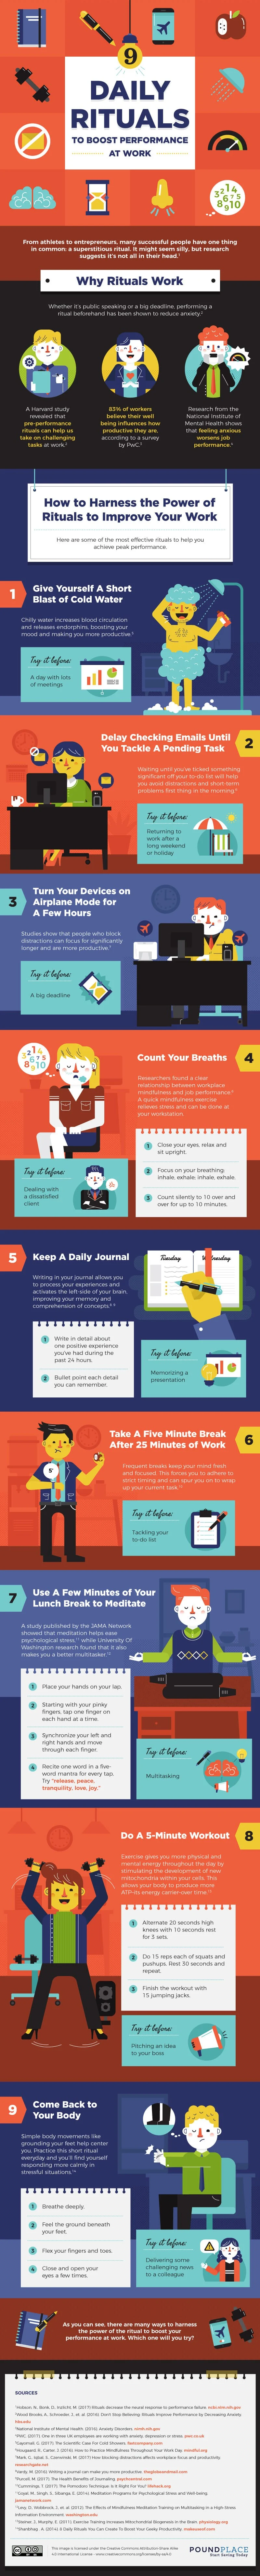 Improve Your Work Performance with These 9 Daily Rituals - #infographic